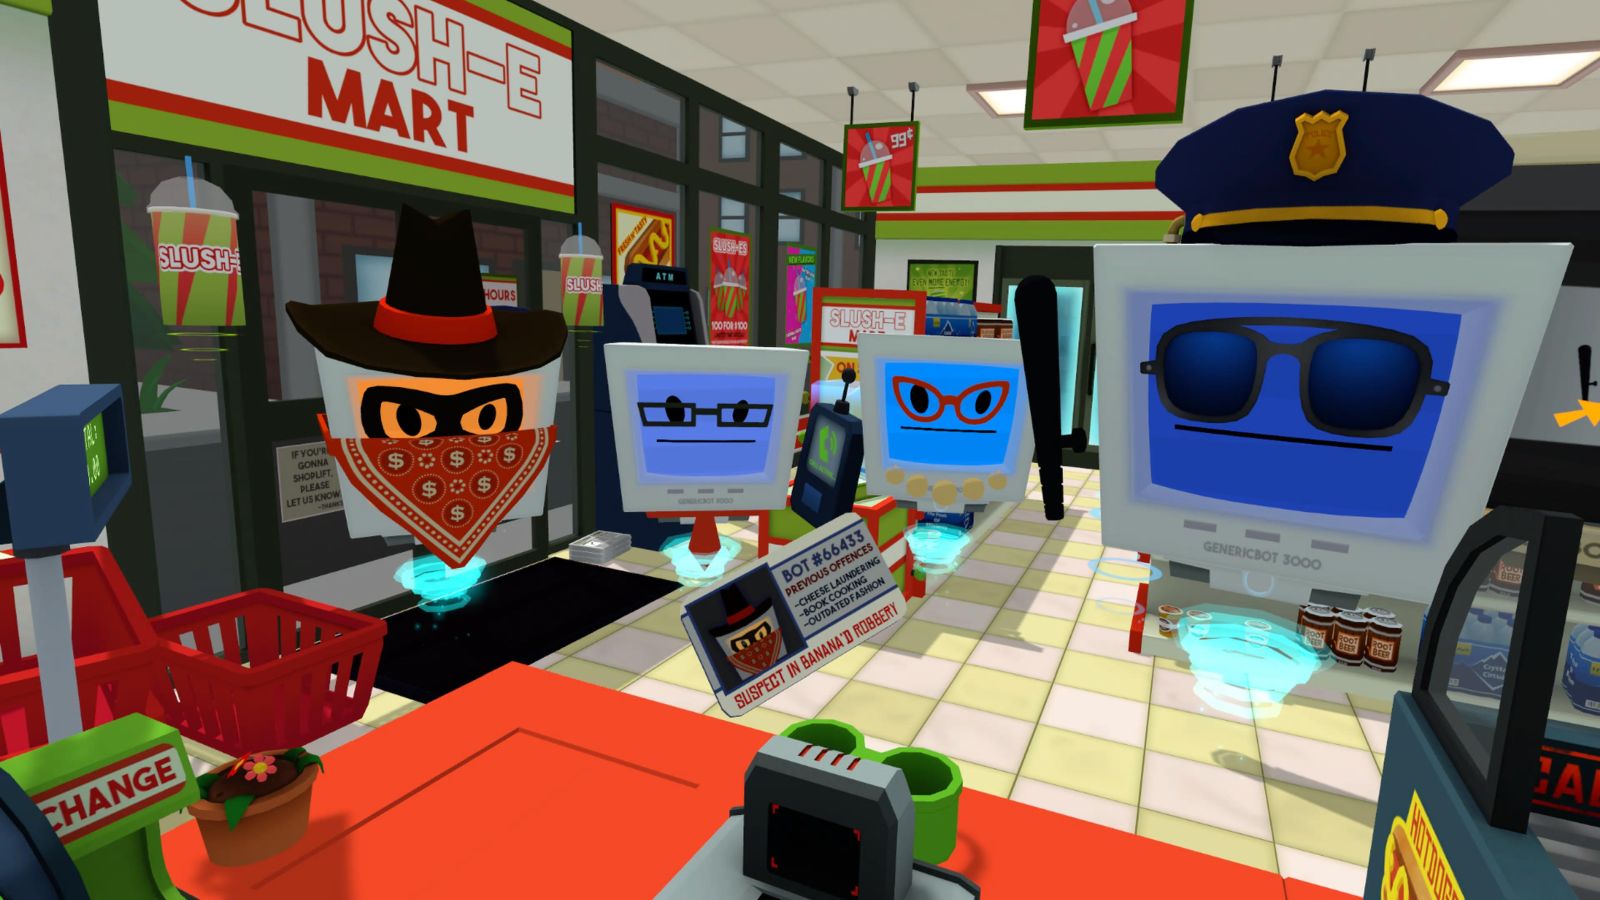 Job Simulator review — It’s time to play [HUMAN] again